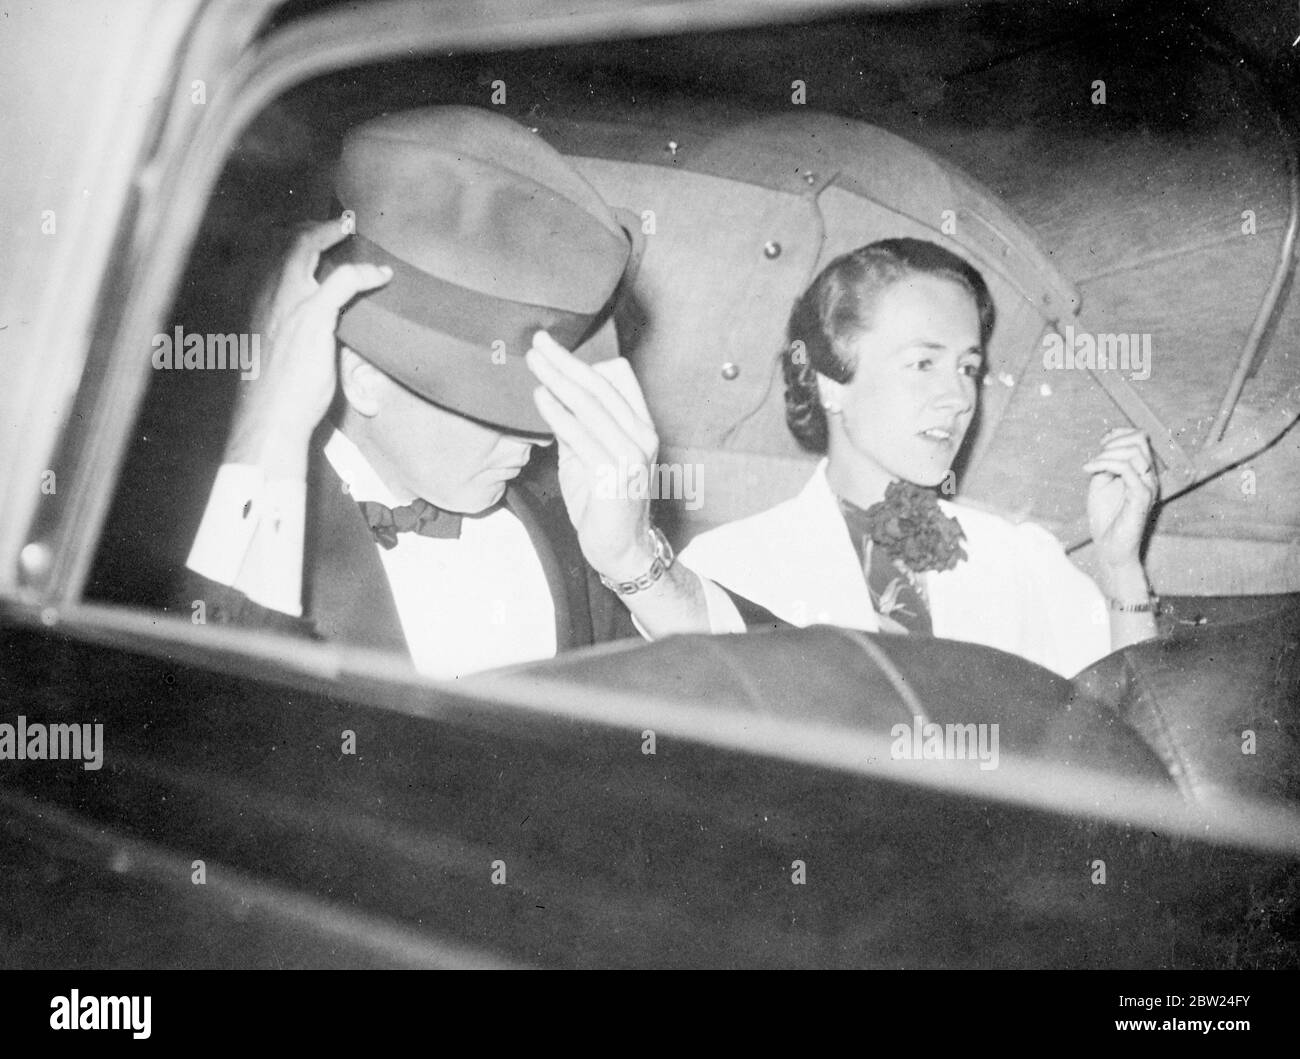 Colonel Charles A Lindbergh tilting his hat in an effort to conceal his face as, with Mrs Lindbergh, he drove away from the hotel Crillon in Paris to attend a party. , Colonel Lindbergh has reportedly visited Russia, Poland and Central Europe. 10 September 1938 Stock Photo